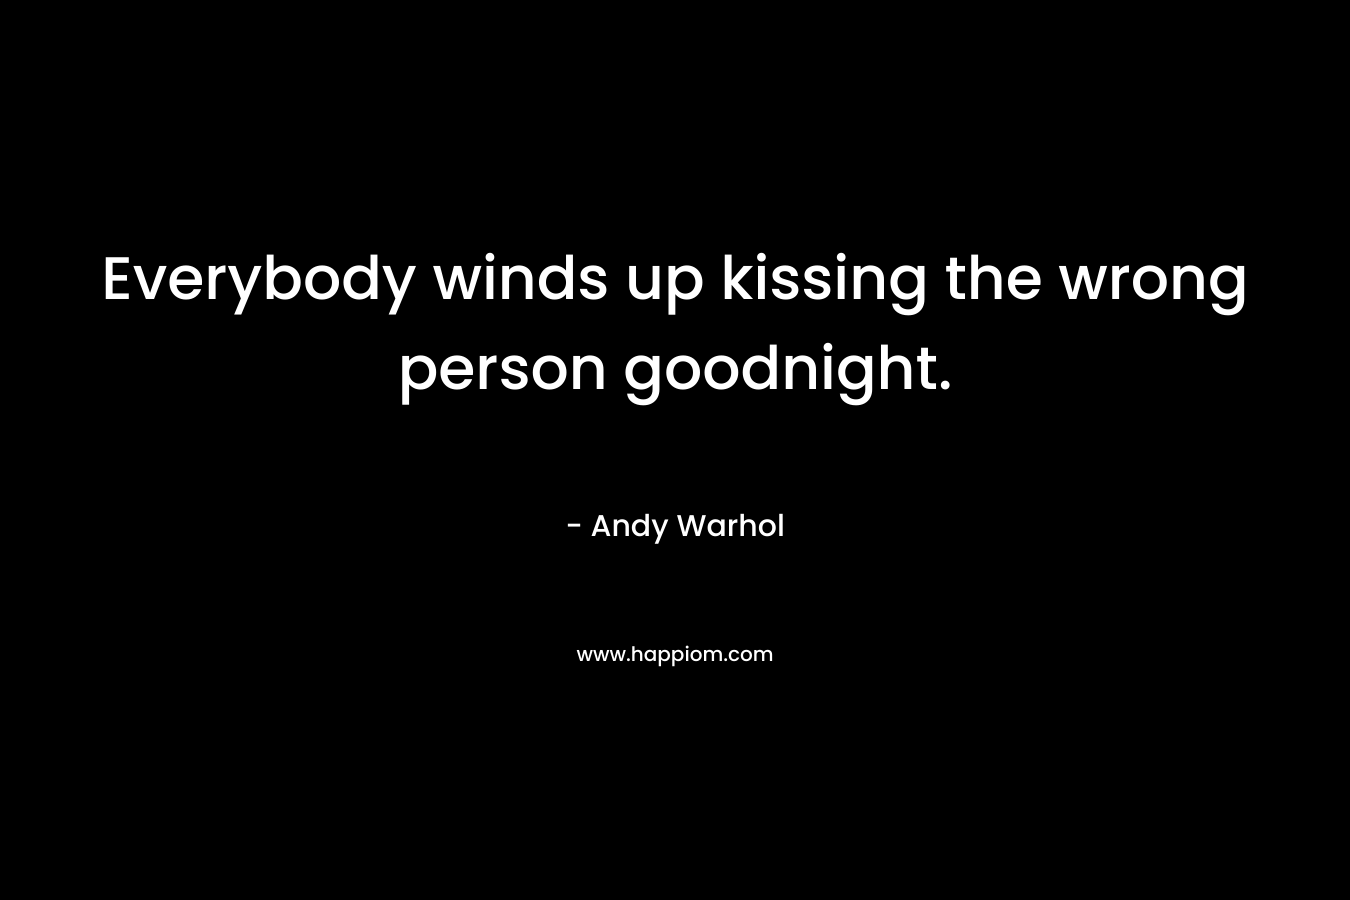 Everybody winds up kissing the wrong person goodnight. – Andy Warhol